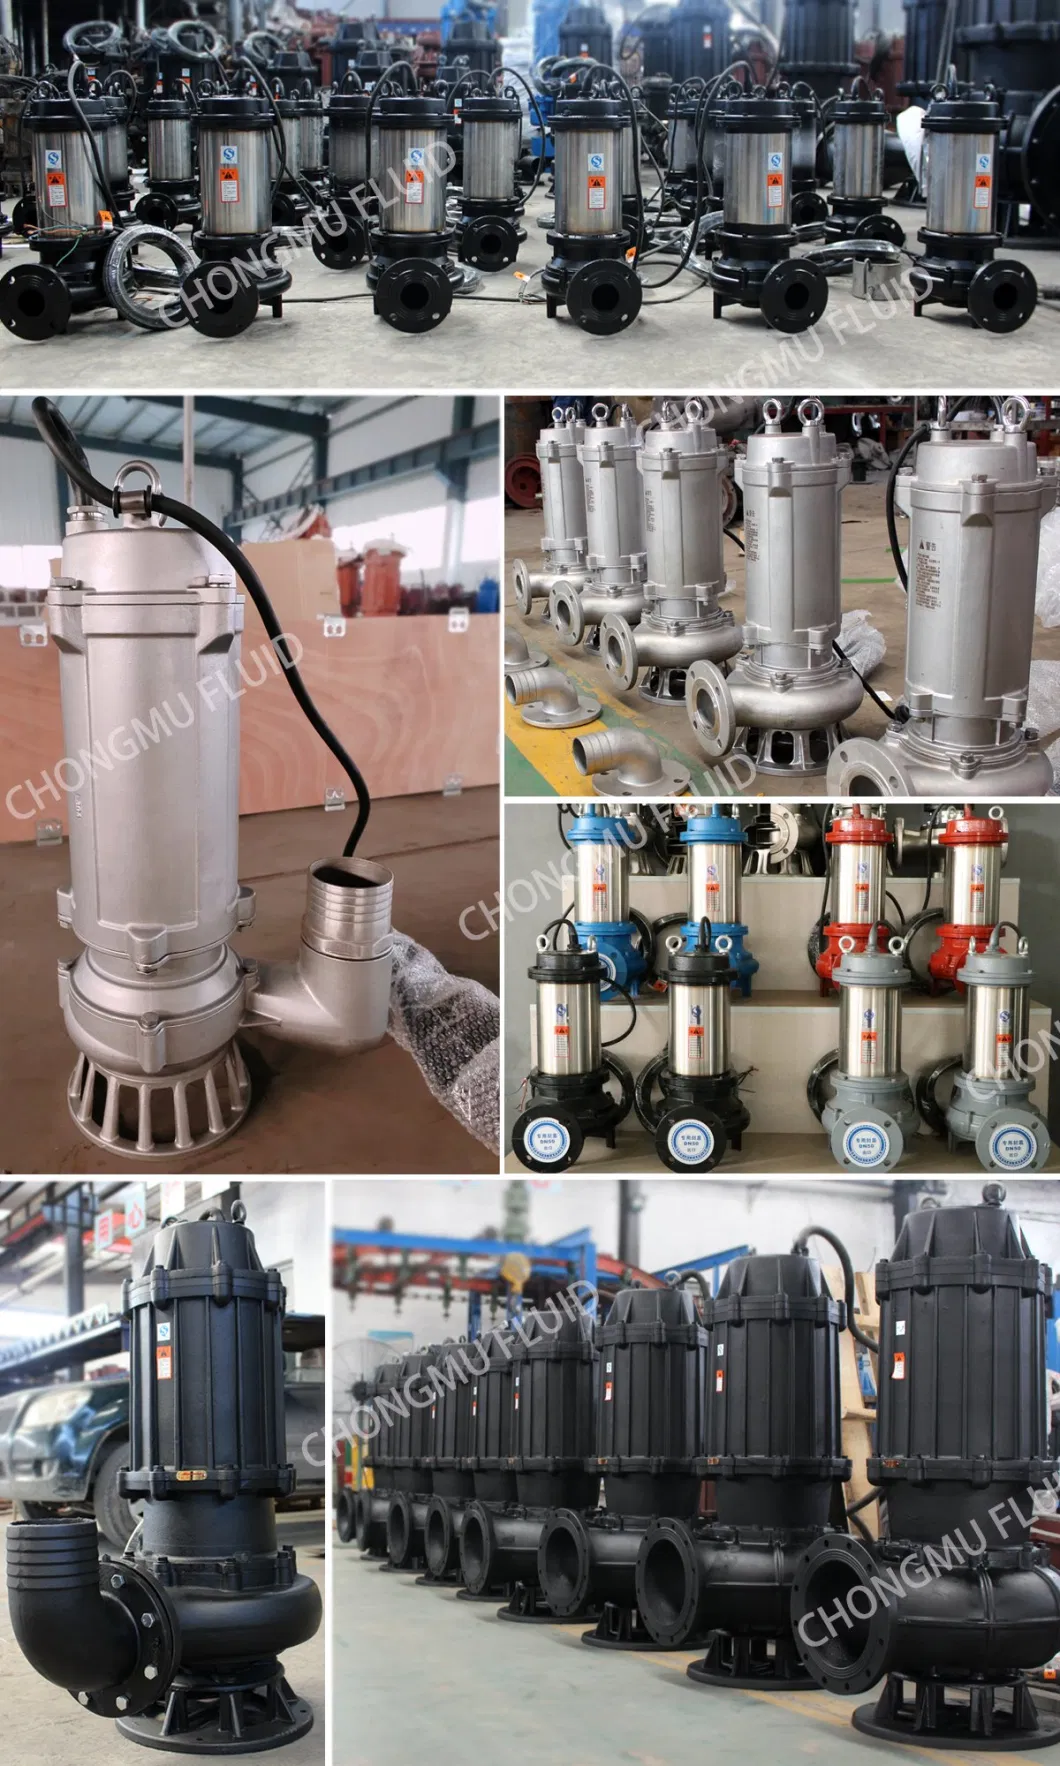 High Efficiency Wastewater Transfer Submersible Slurry Pumps for Dirty Water